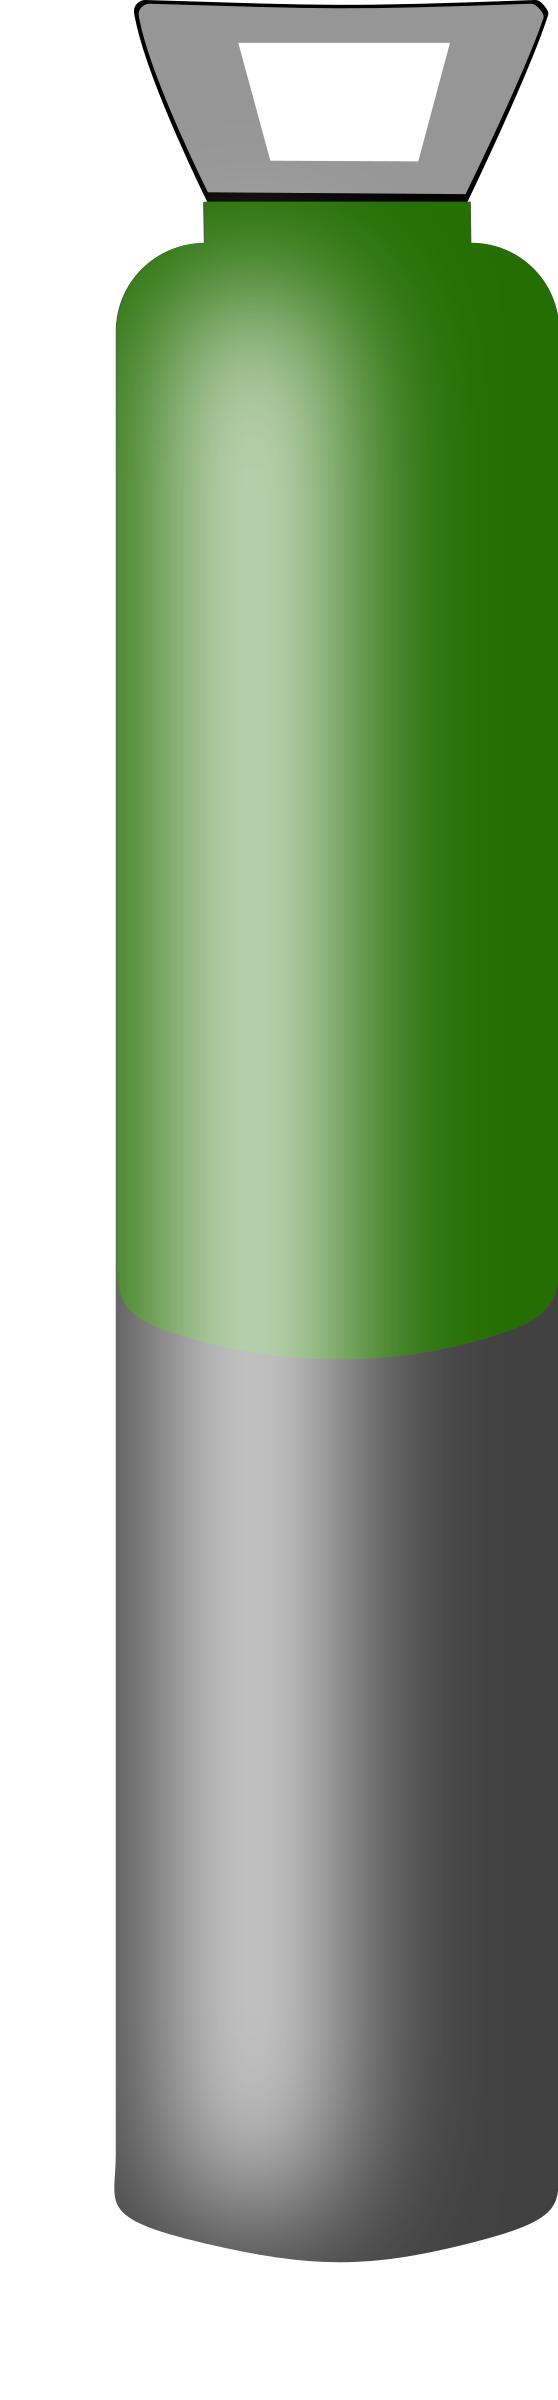 Gas cylinder grey and dark green, high pressure for Argon png